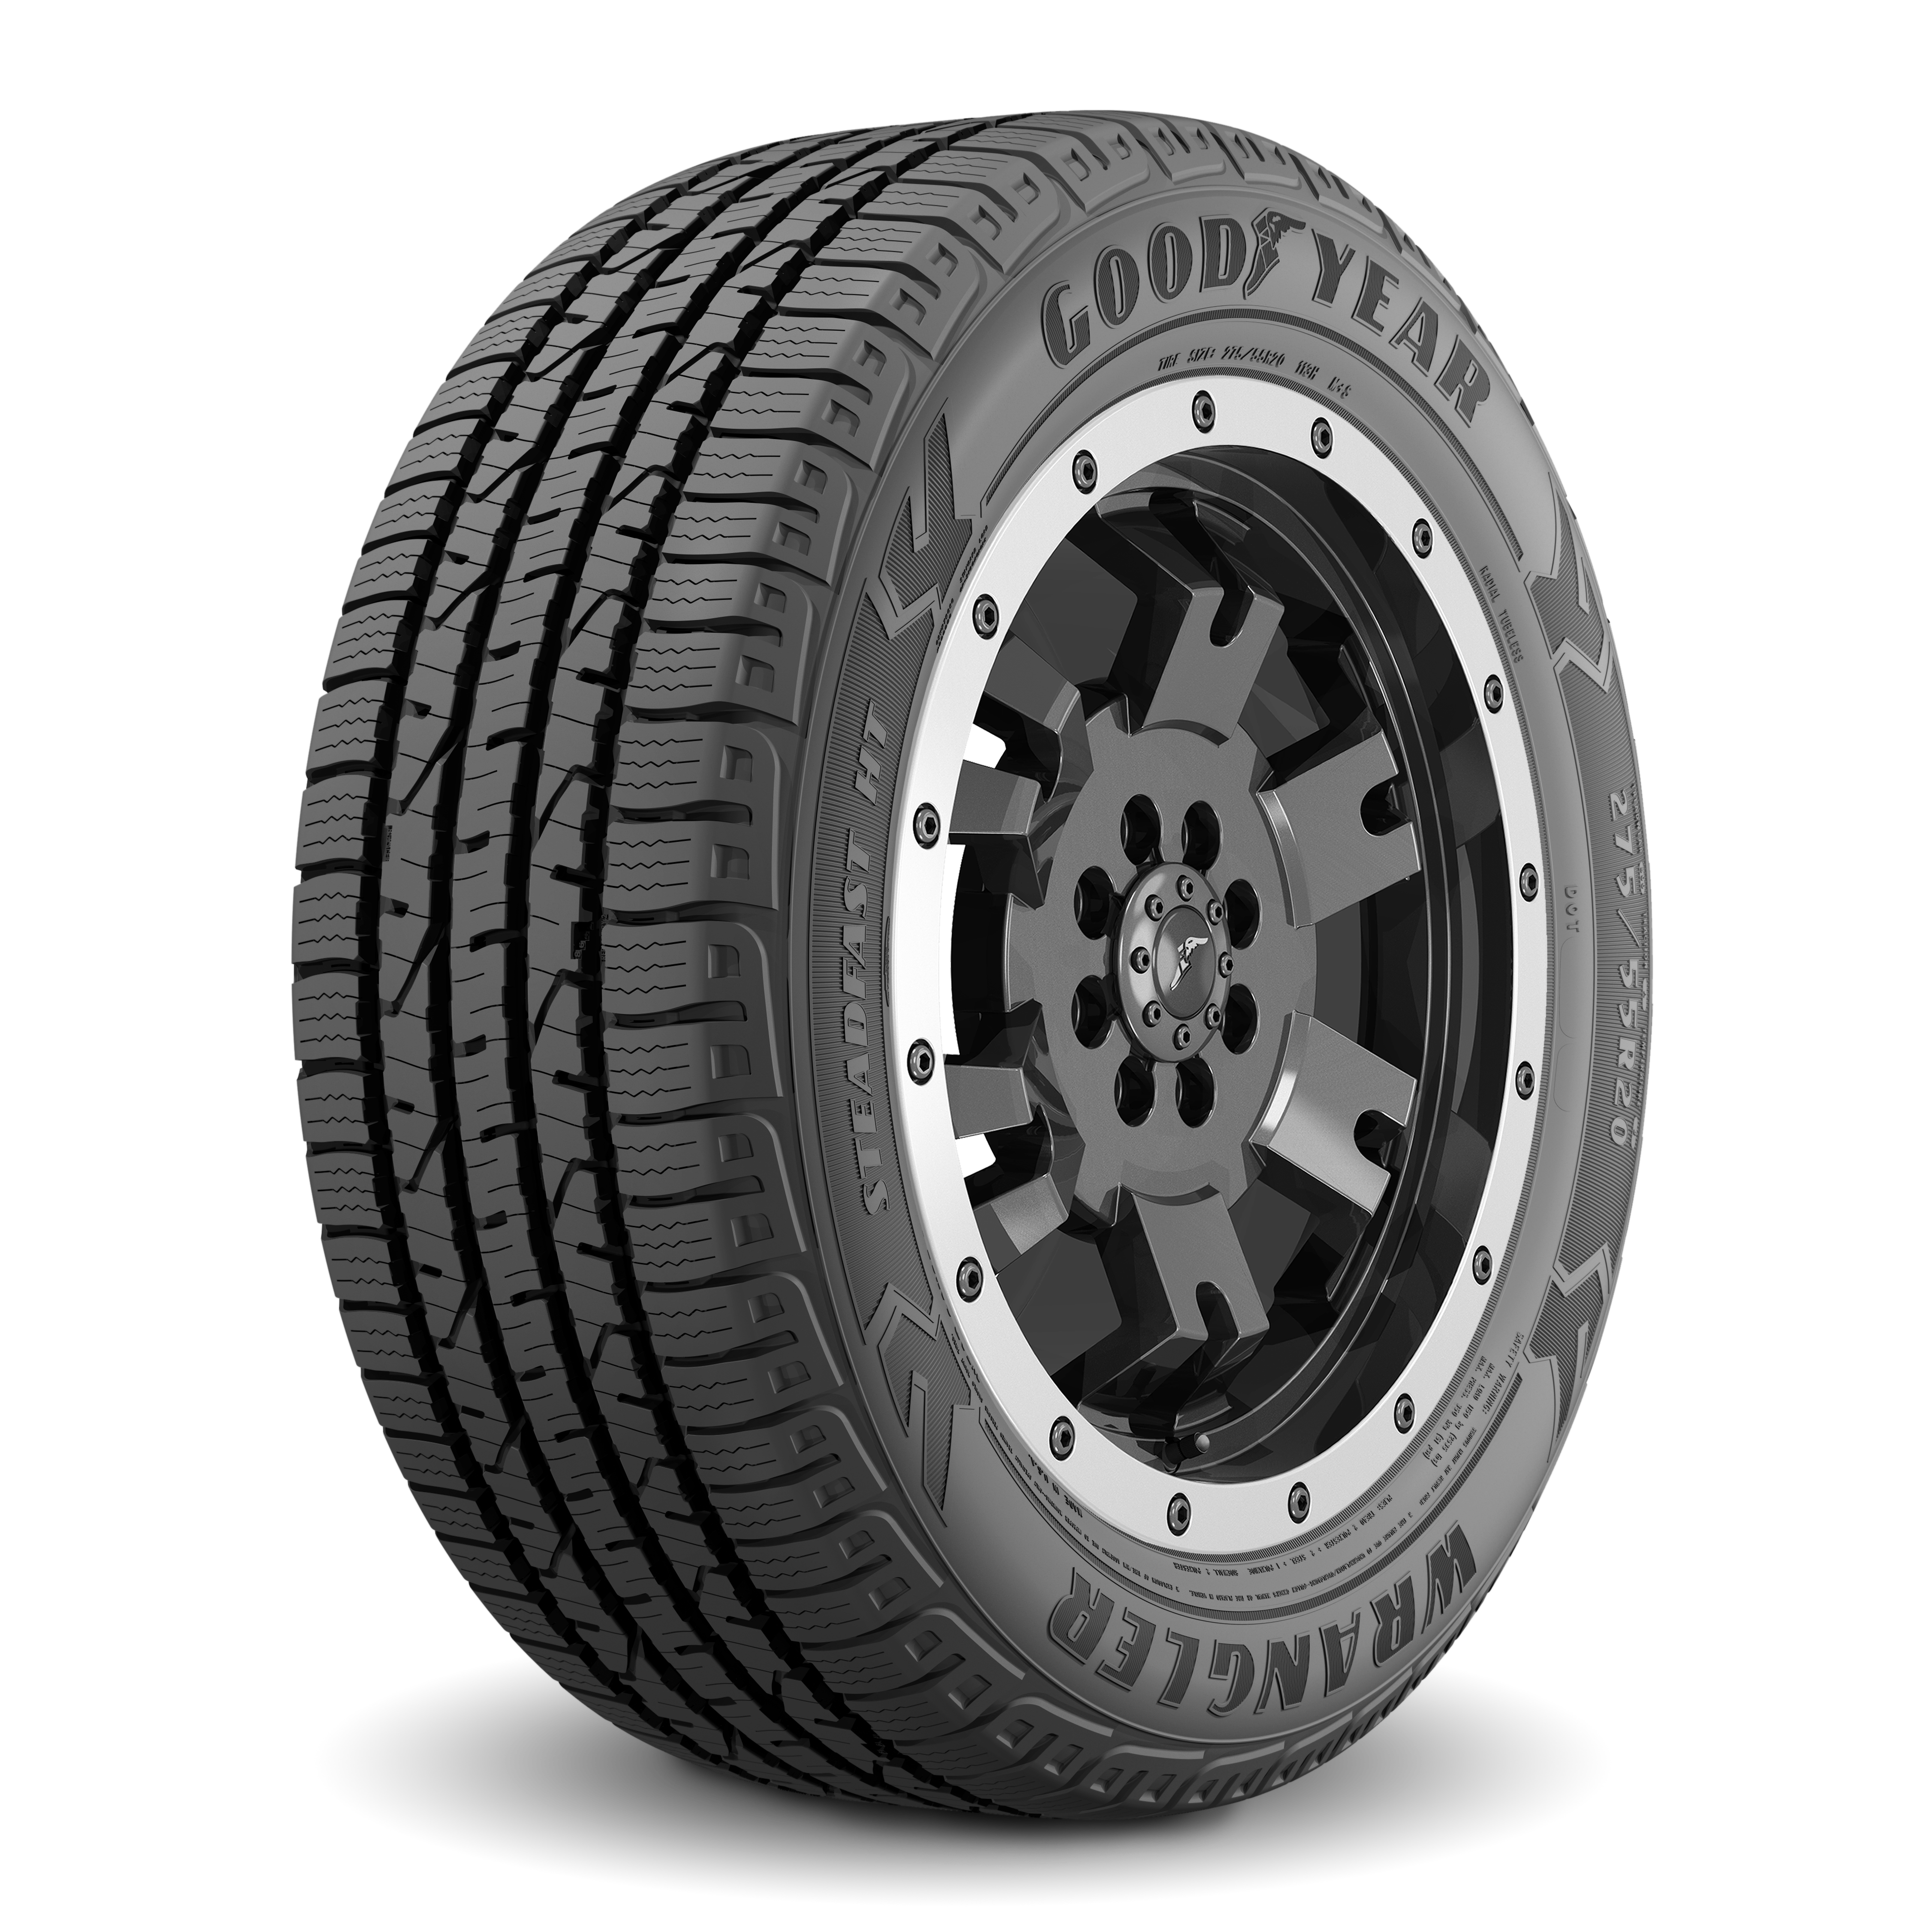 Goodyear Wrangler Steadfast HT - Tyre Reviews and Tests